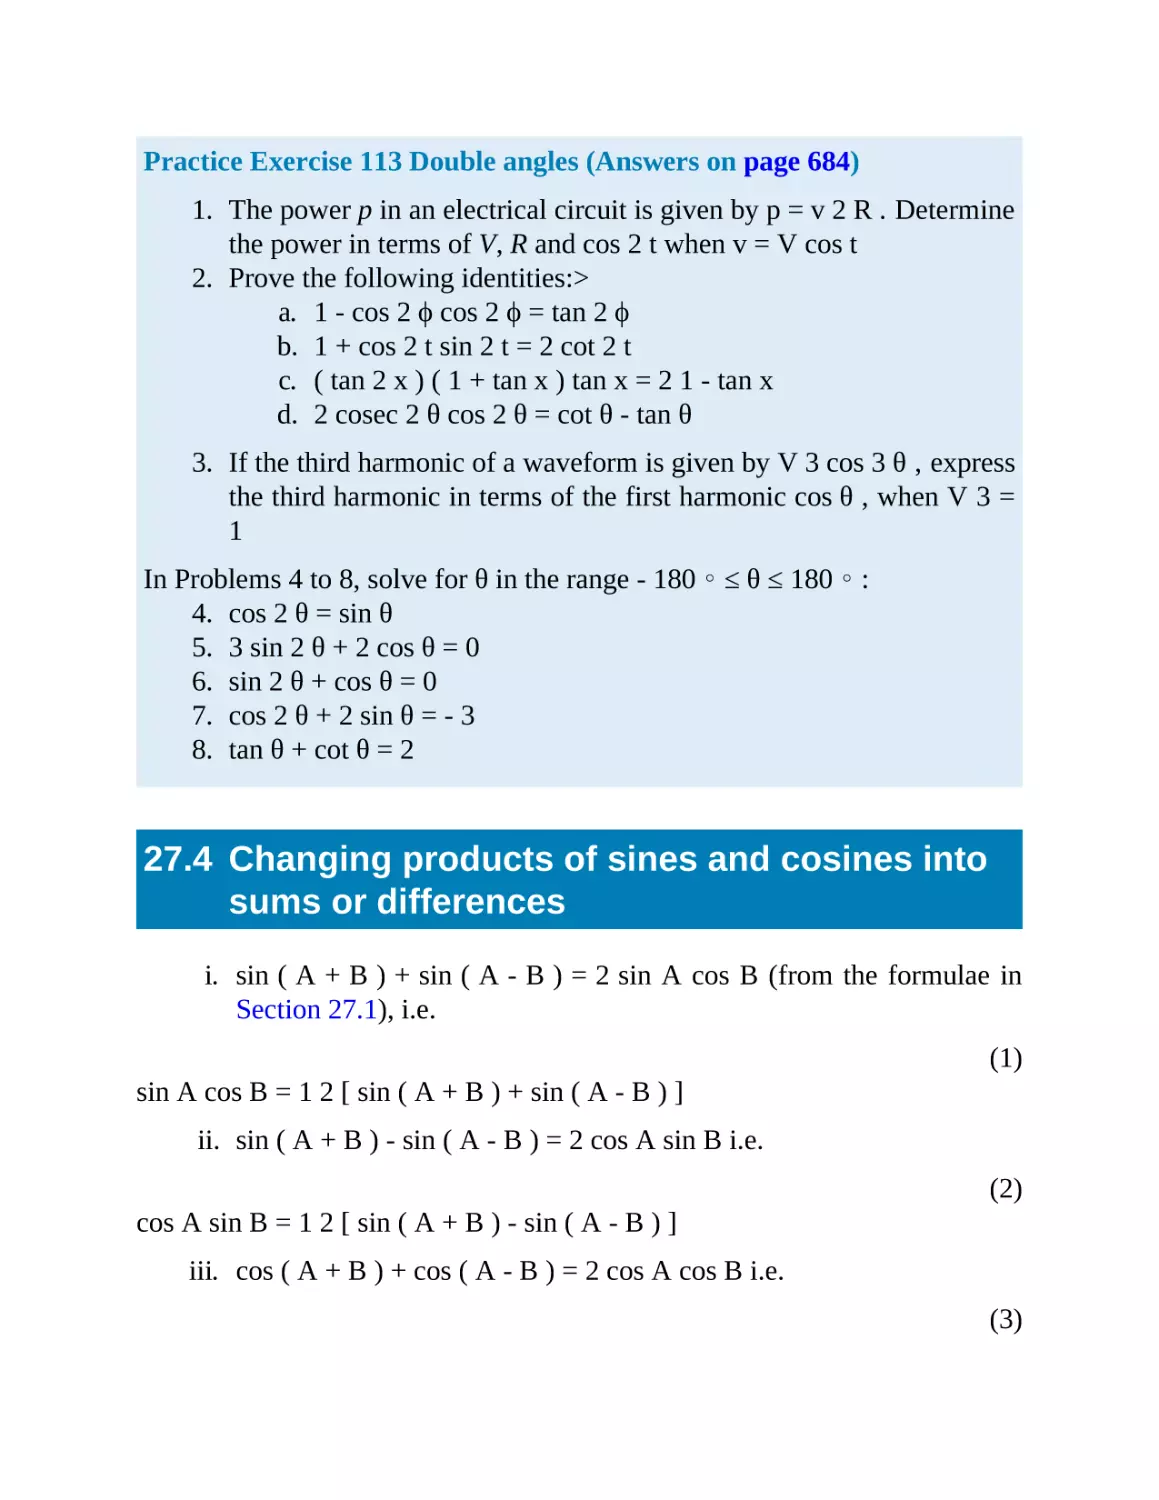 27.4 Changing products of sines and cosines into sums or differences